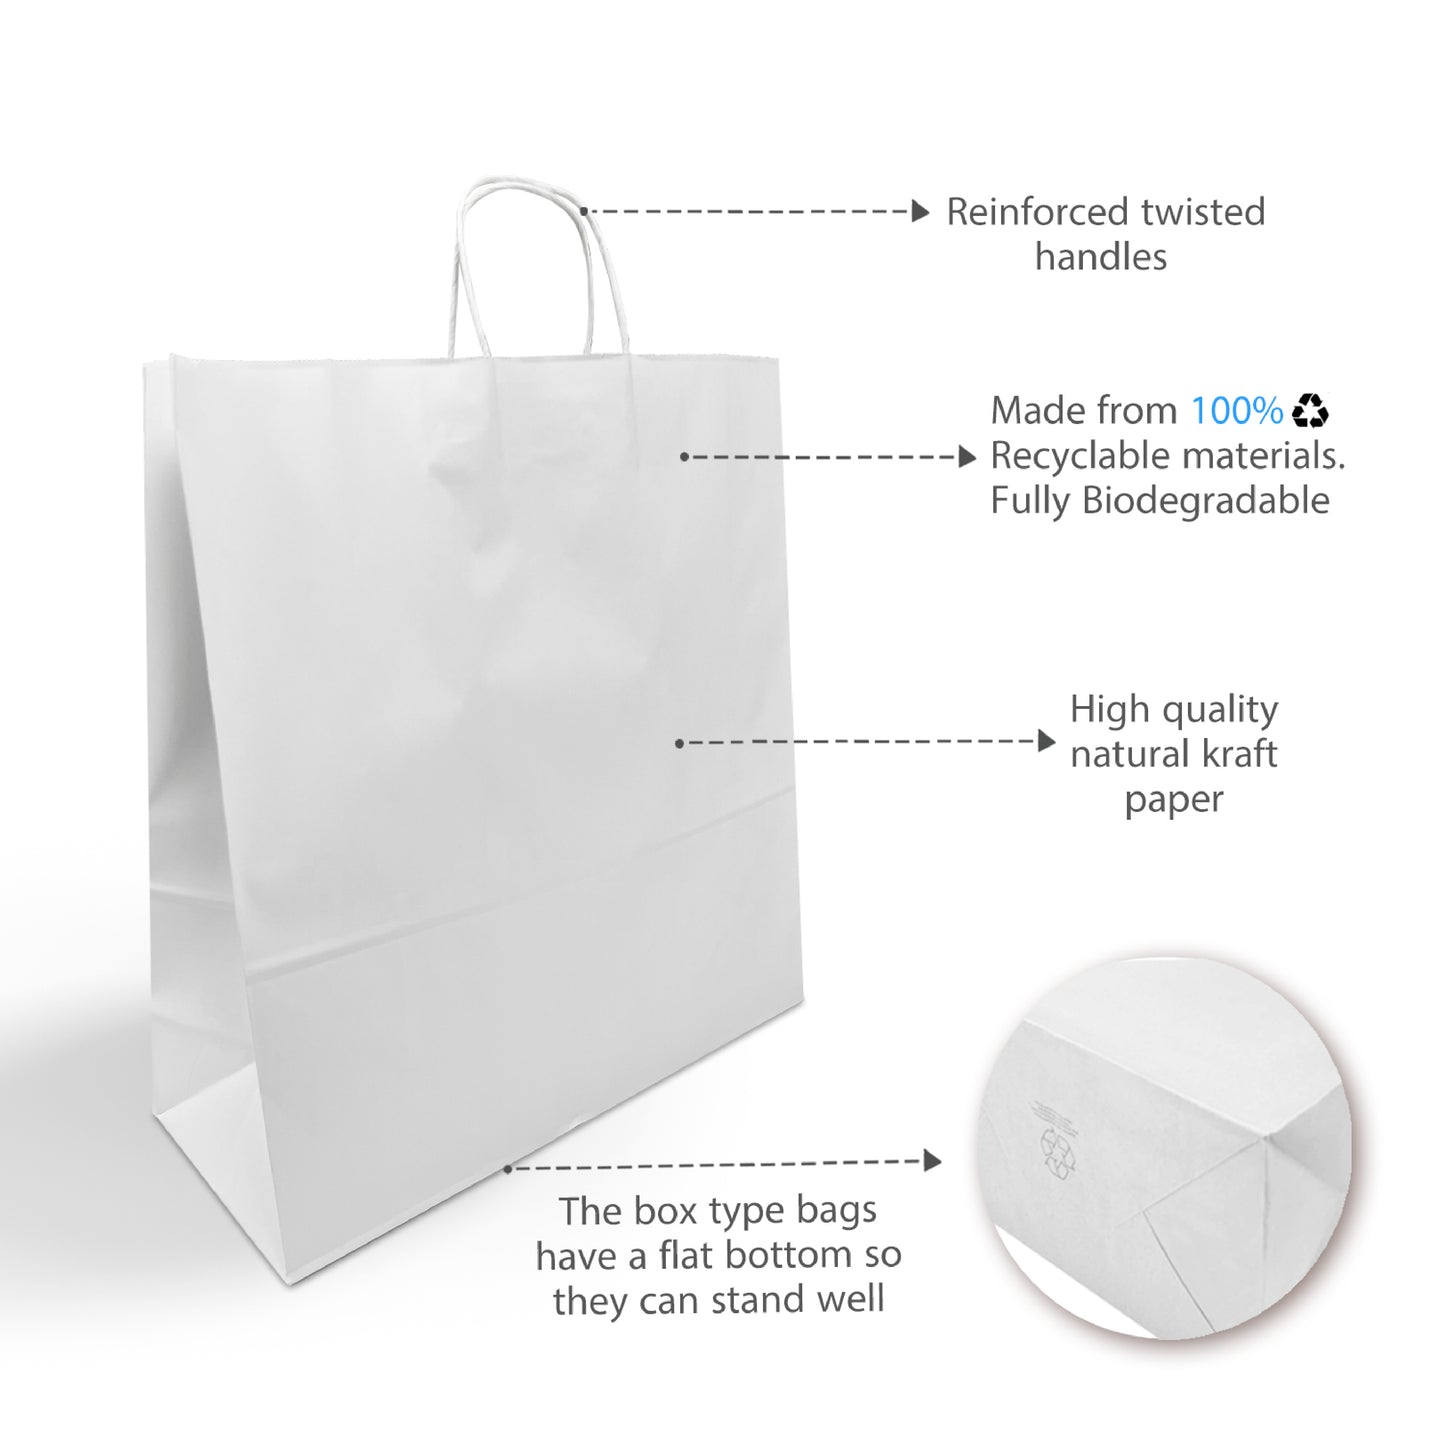 200 Pcs, Jumbo, 18x7x19 inches, White Kraft Paper Bags, with Twisted Handles